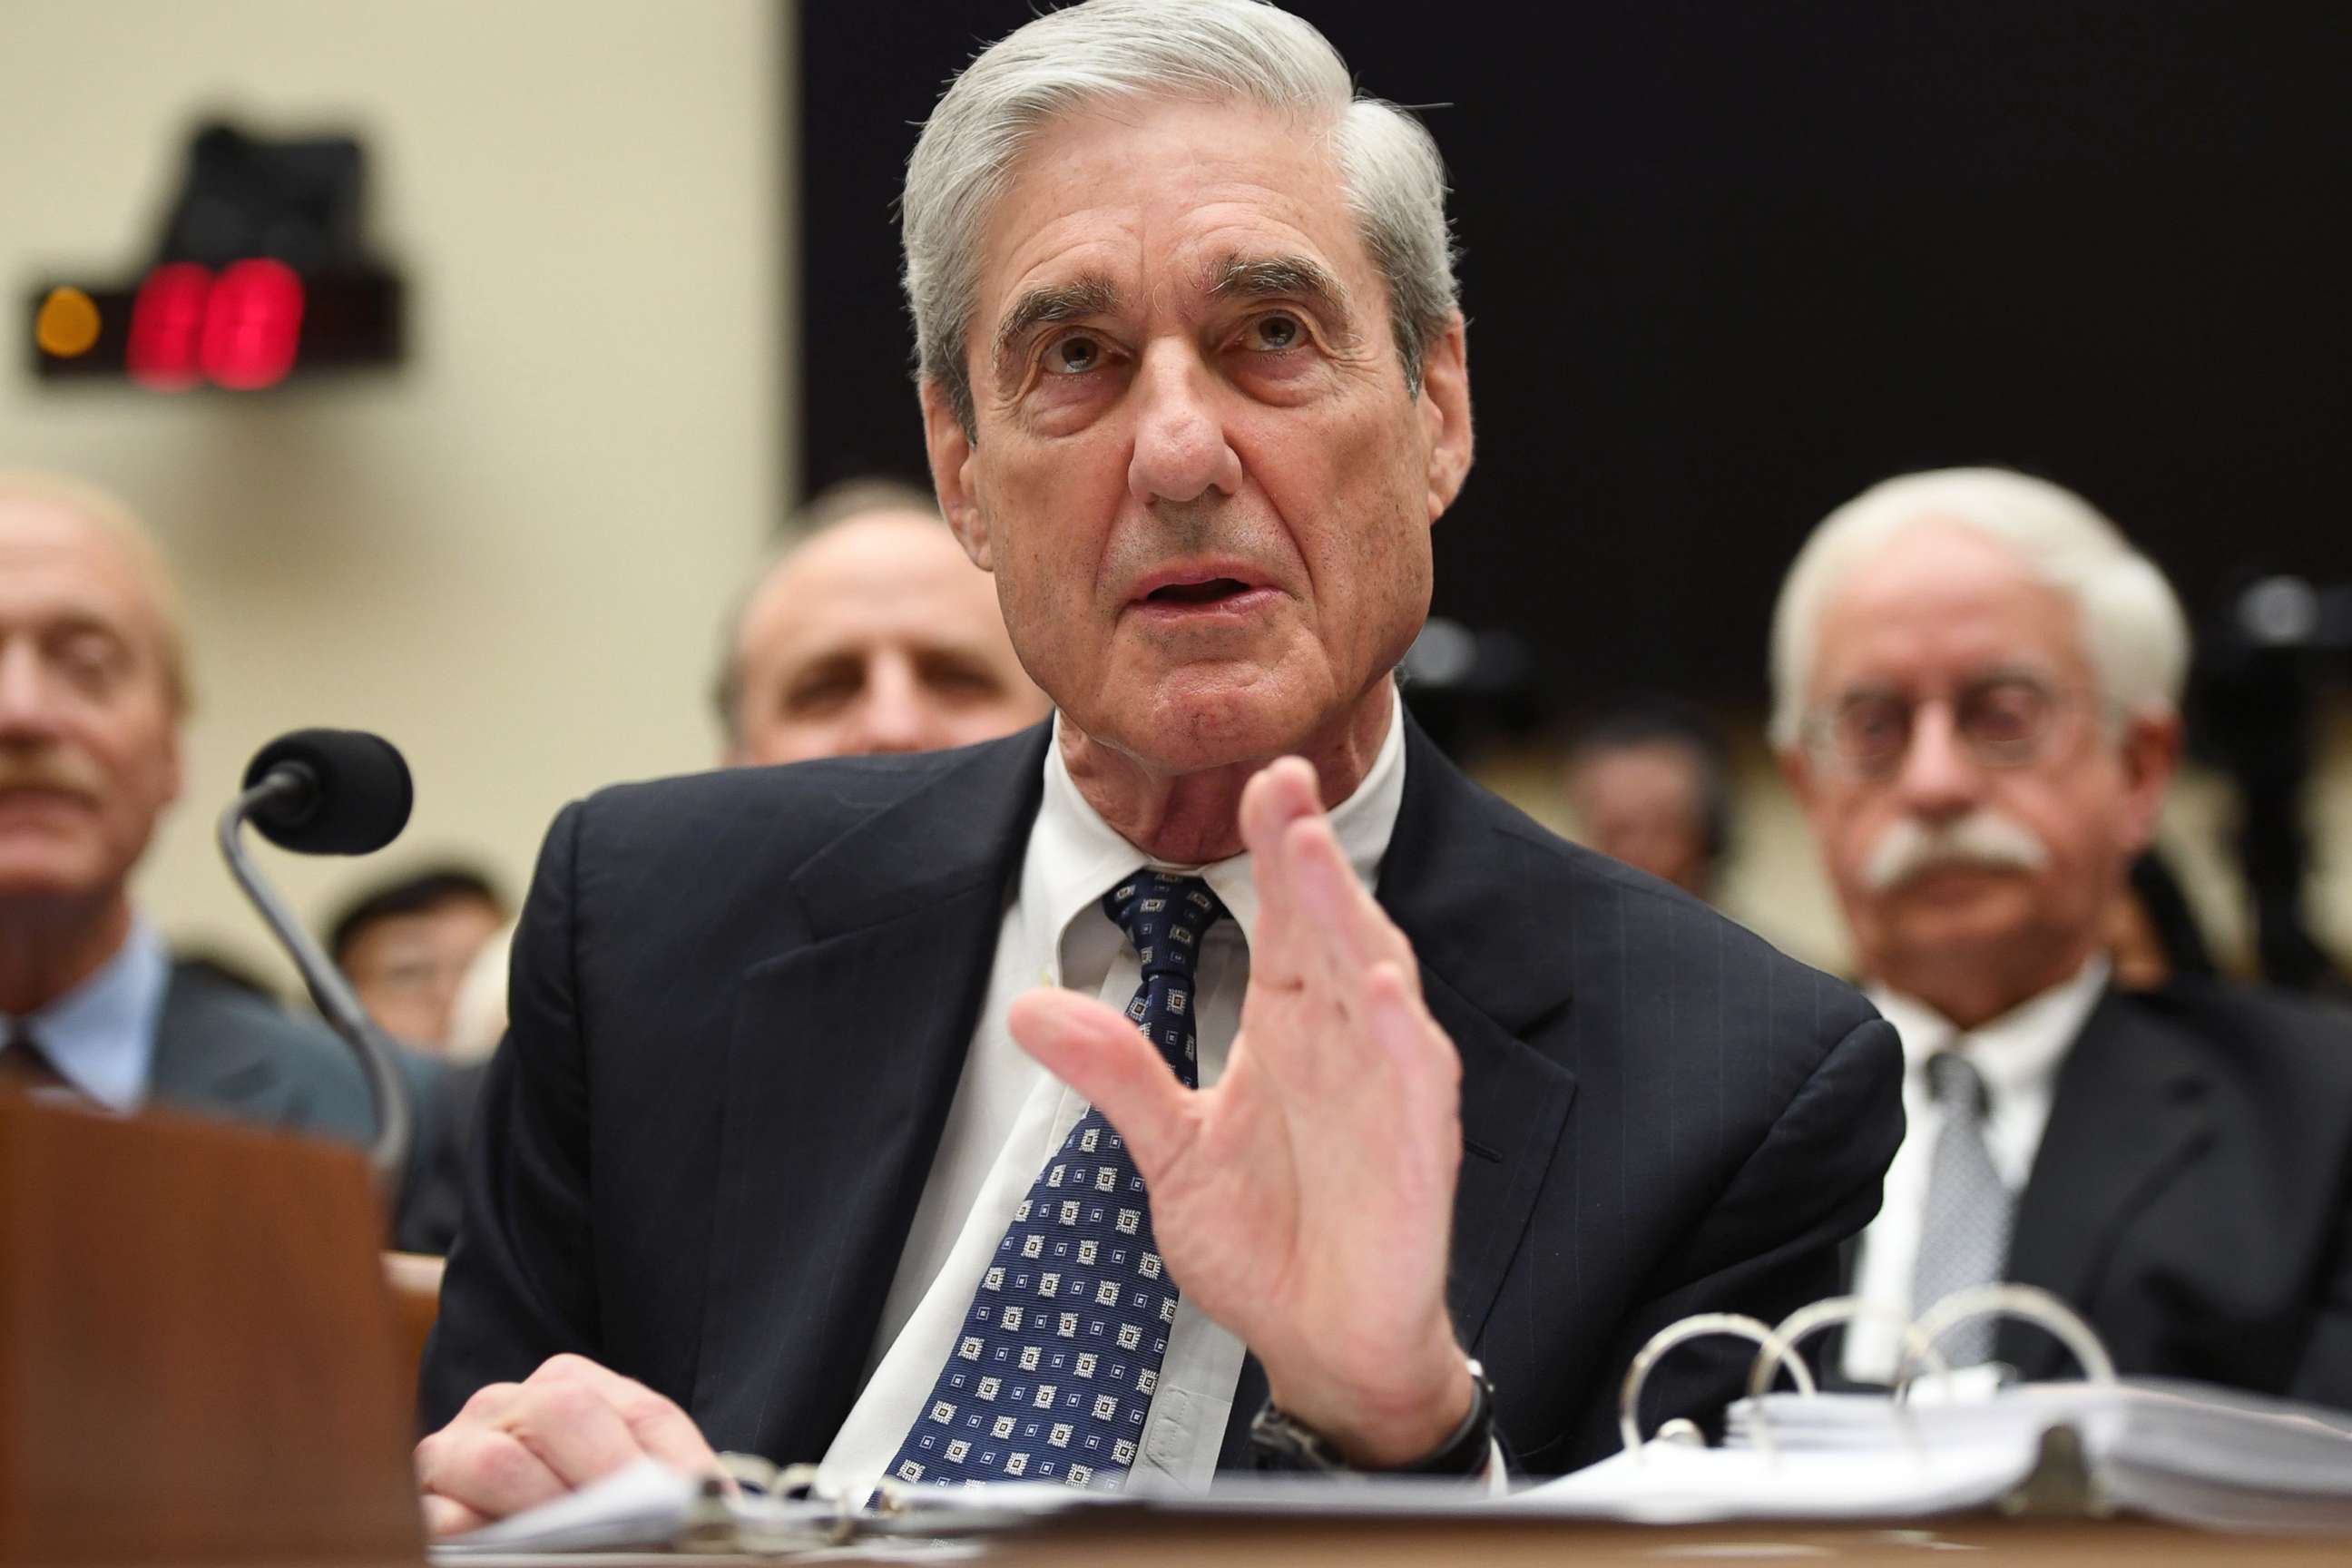 PHOTO: Former Special Prosecutor Robert Mueller testifies before Congress, July 24, 2019, in Washington, D.C., about his report on Russia election interference.